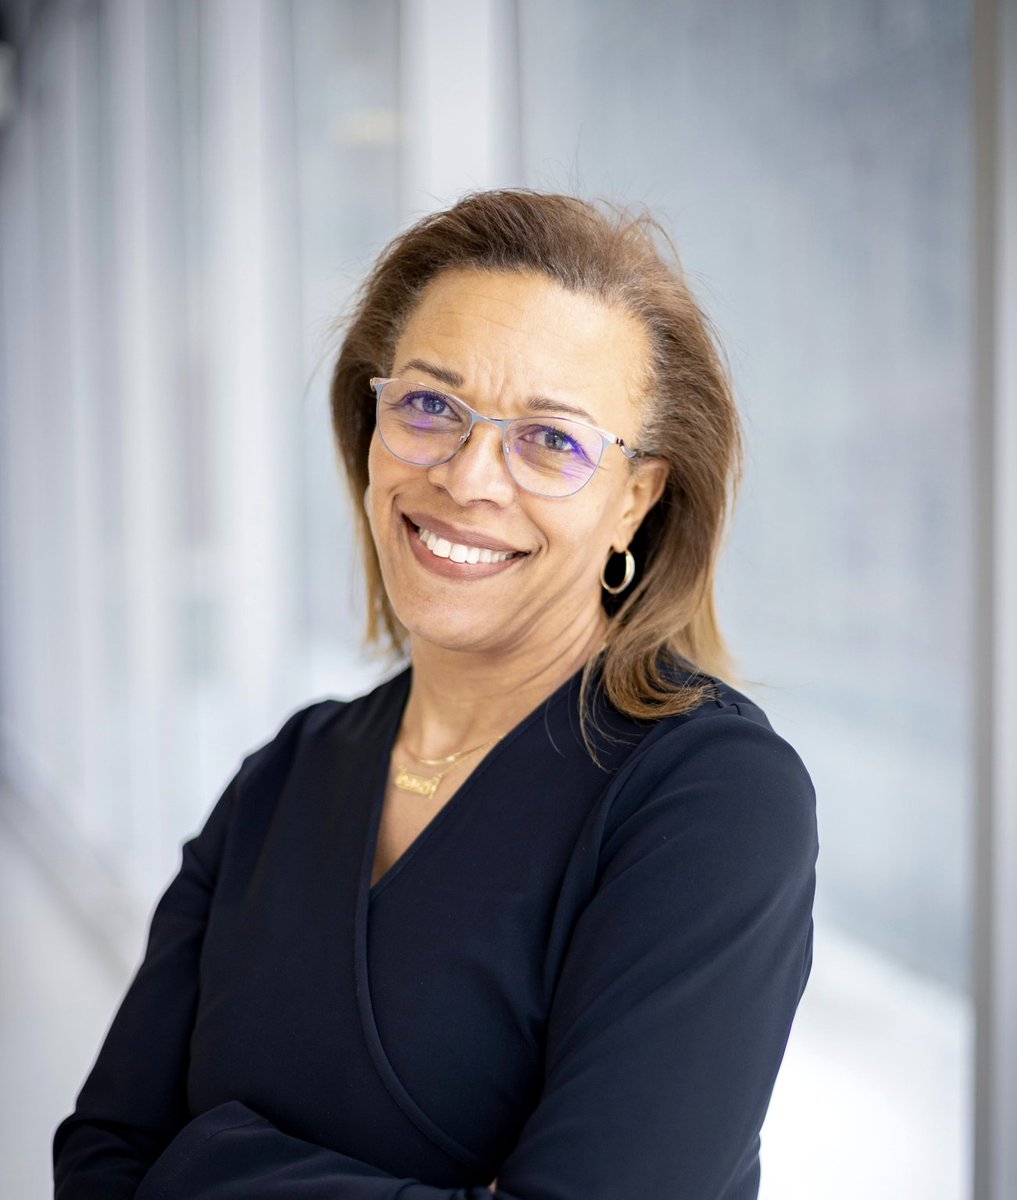 “I really believe in paying it forward.'
#TemertyMed Prof. Mireille Norris established the Mireille Aarons Norris Award for Black Medical Students to support MD students with financial need. bit.ly/4bikzk9